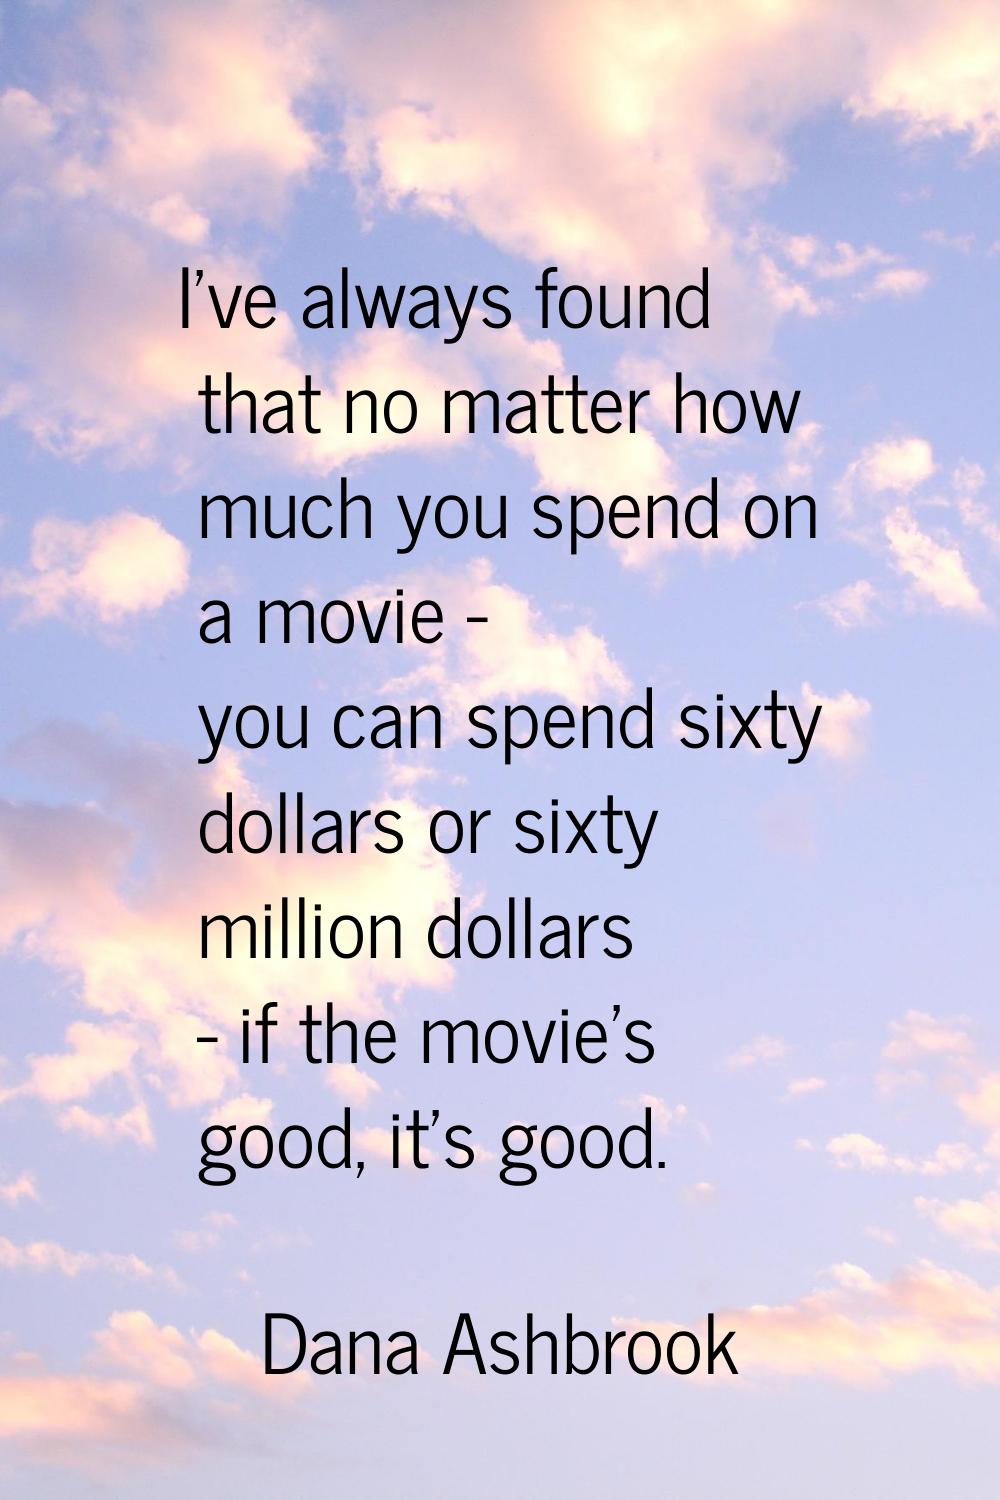 I've always found that no matter how much you spend on a movie - you can spend sixty dollars or six